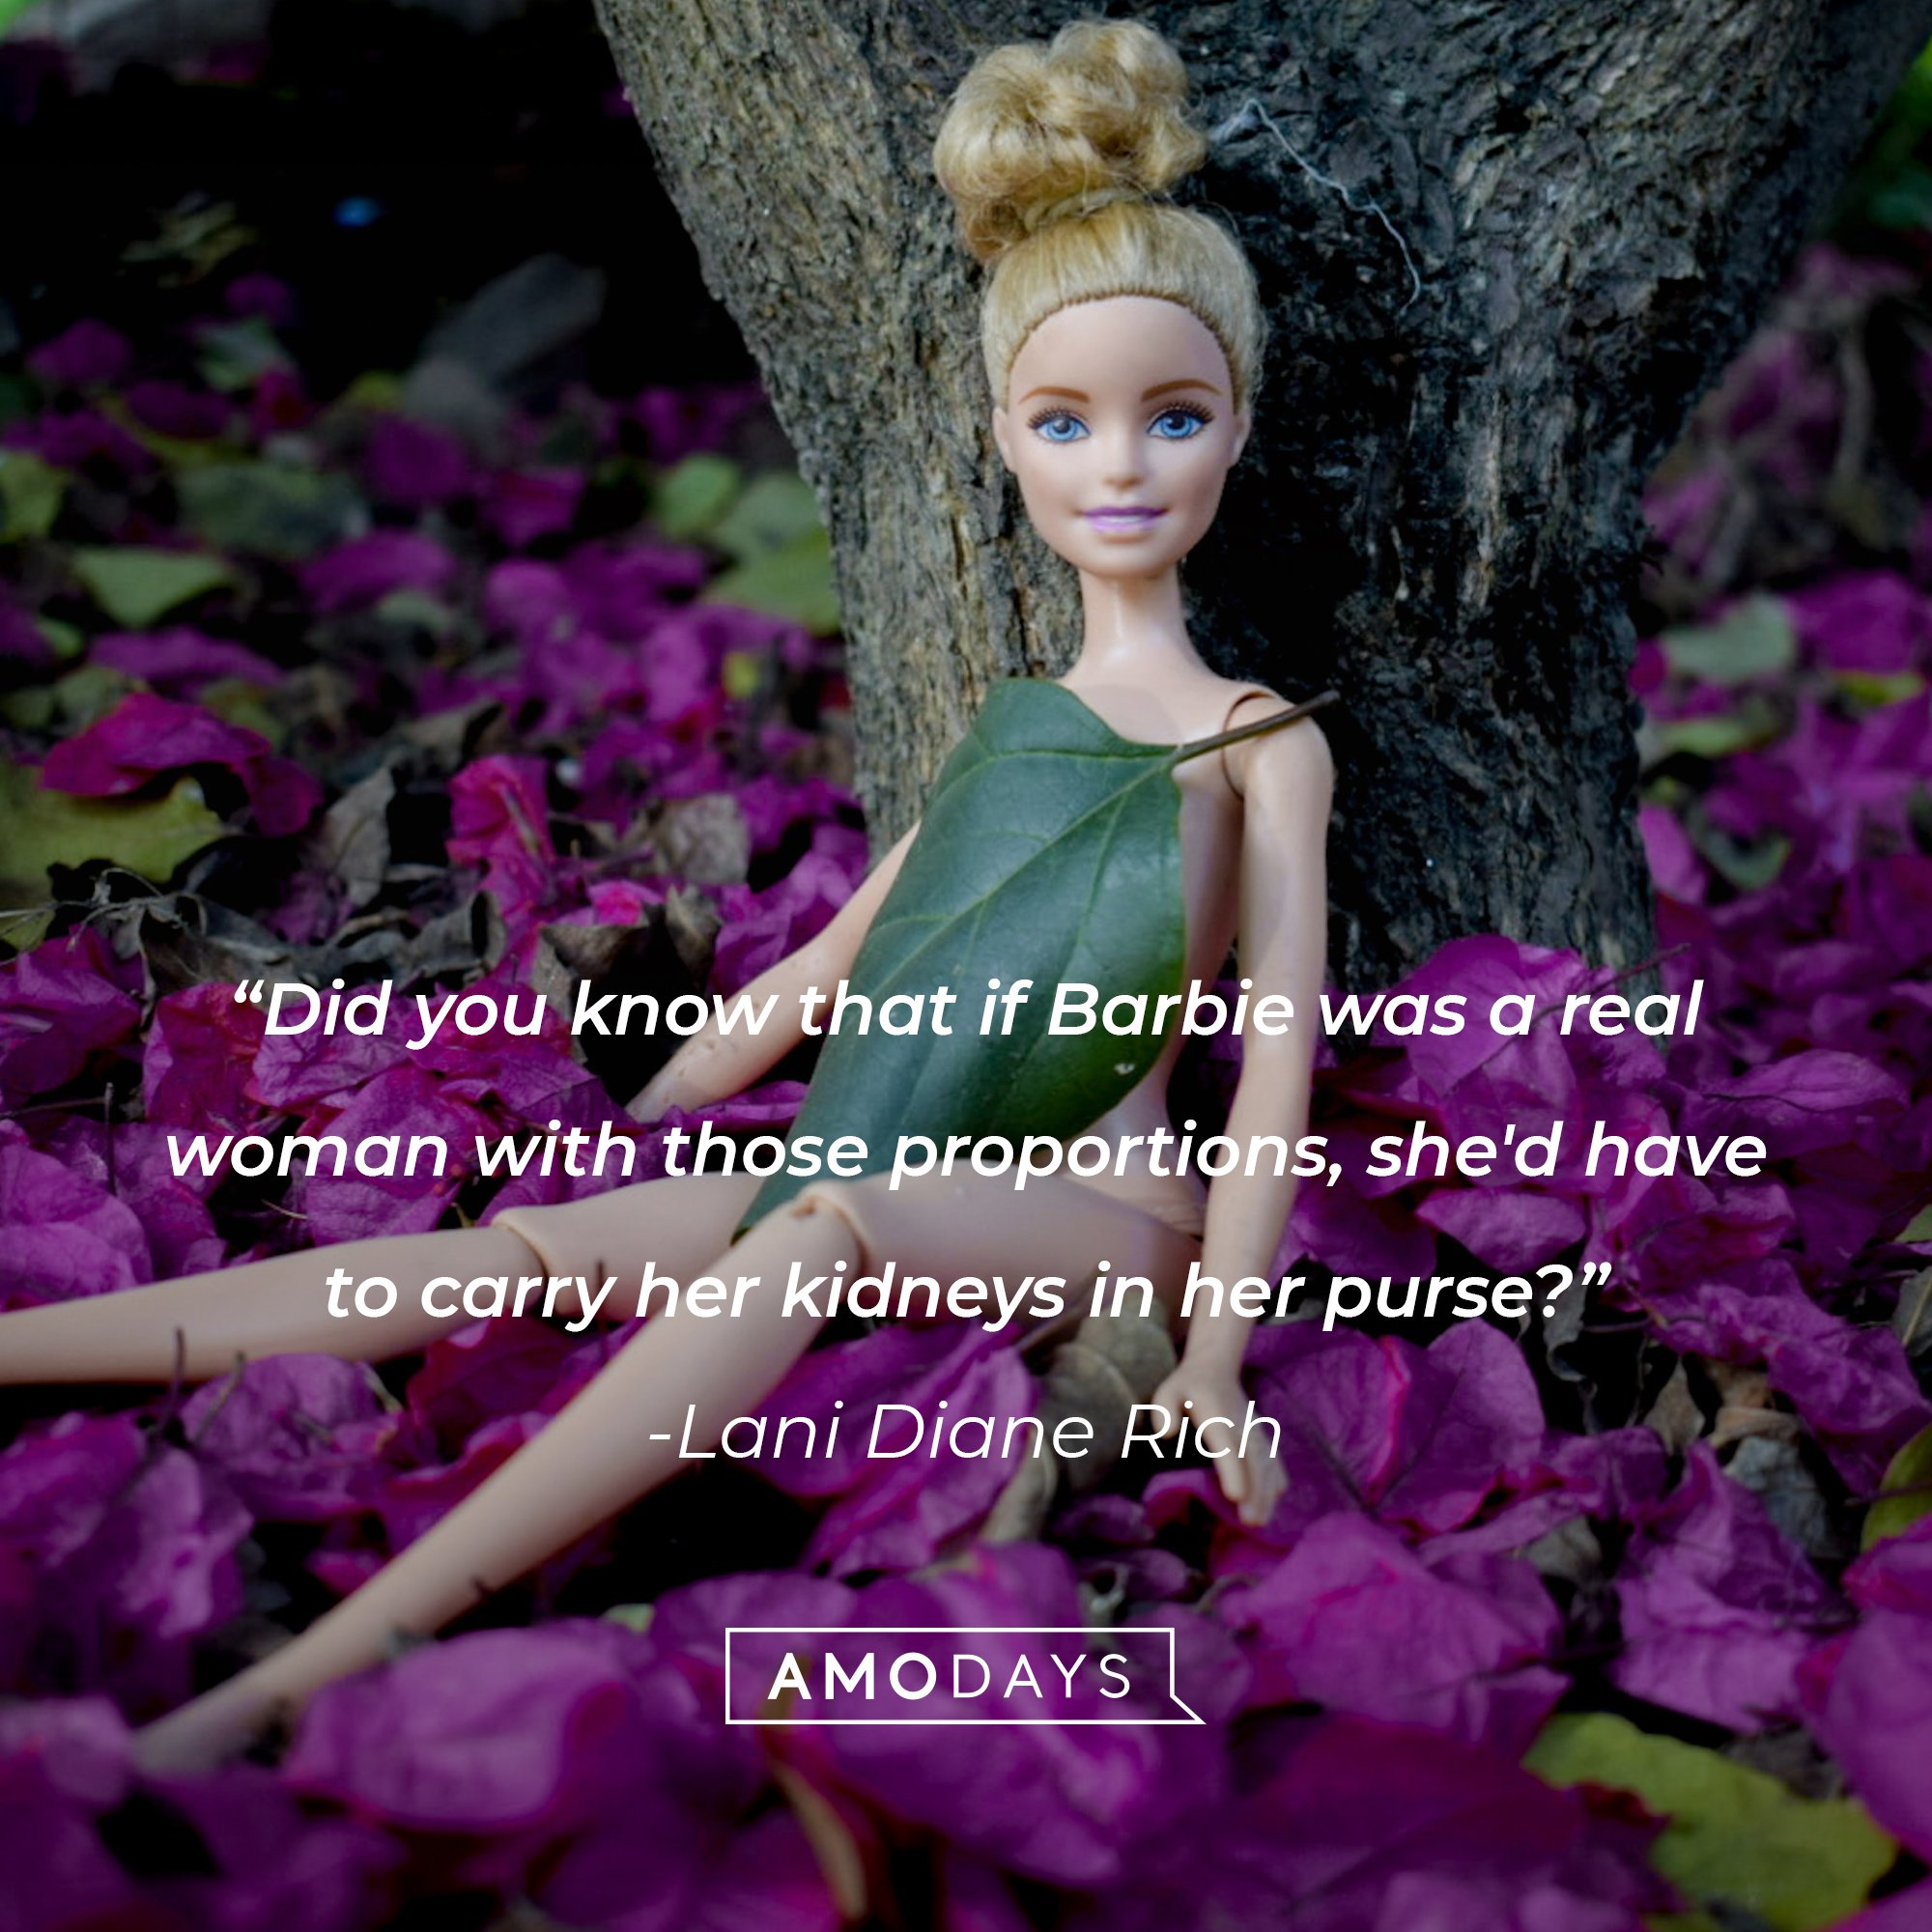 Lani Diane Rich's quote: "Did you know that if Barbie was a real woman with those proportions, she'd have to carry her kidneys in her purse?" | Image: AmoDays